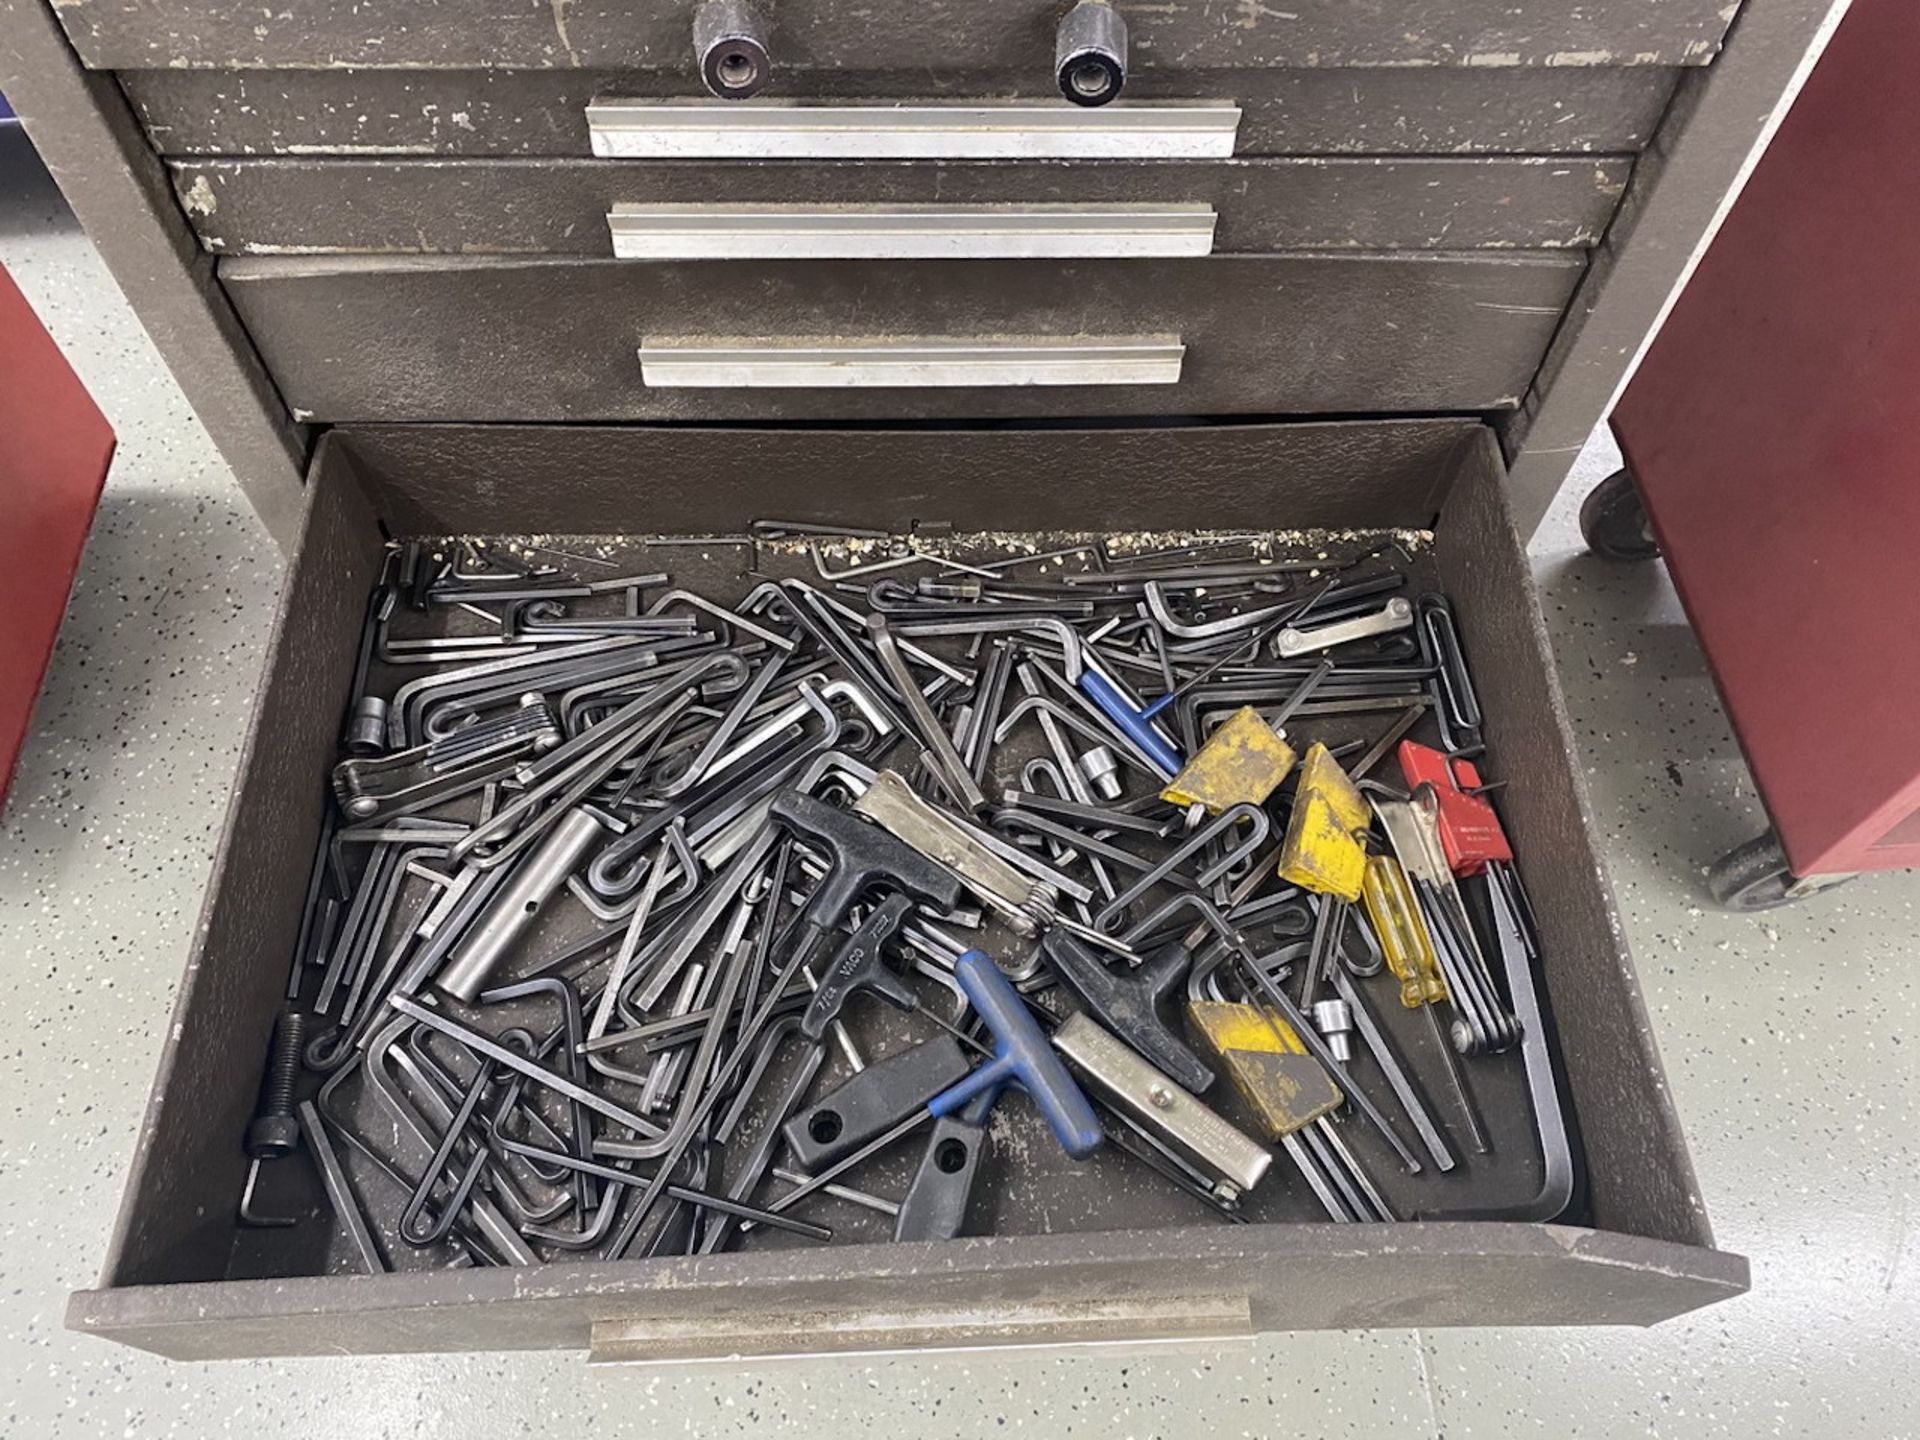 Kennedy 27" x 18" Tool Box Including Assorted Hand Tools, Wrenches, Screwdrivers and Hex Keys - Image 8 of 11